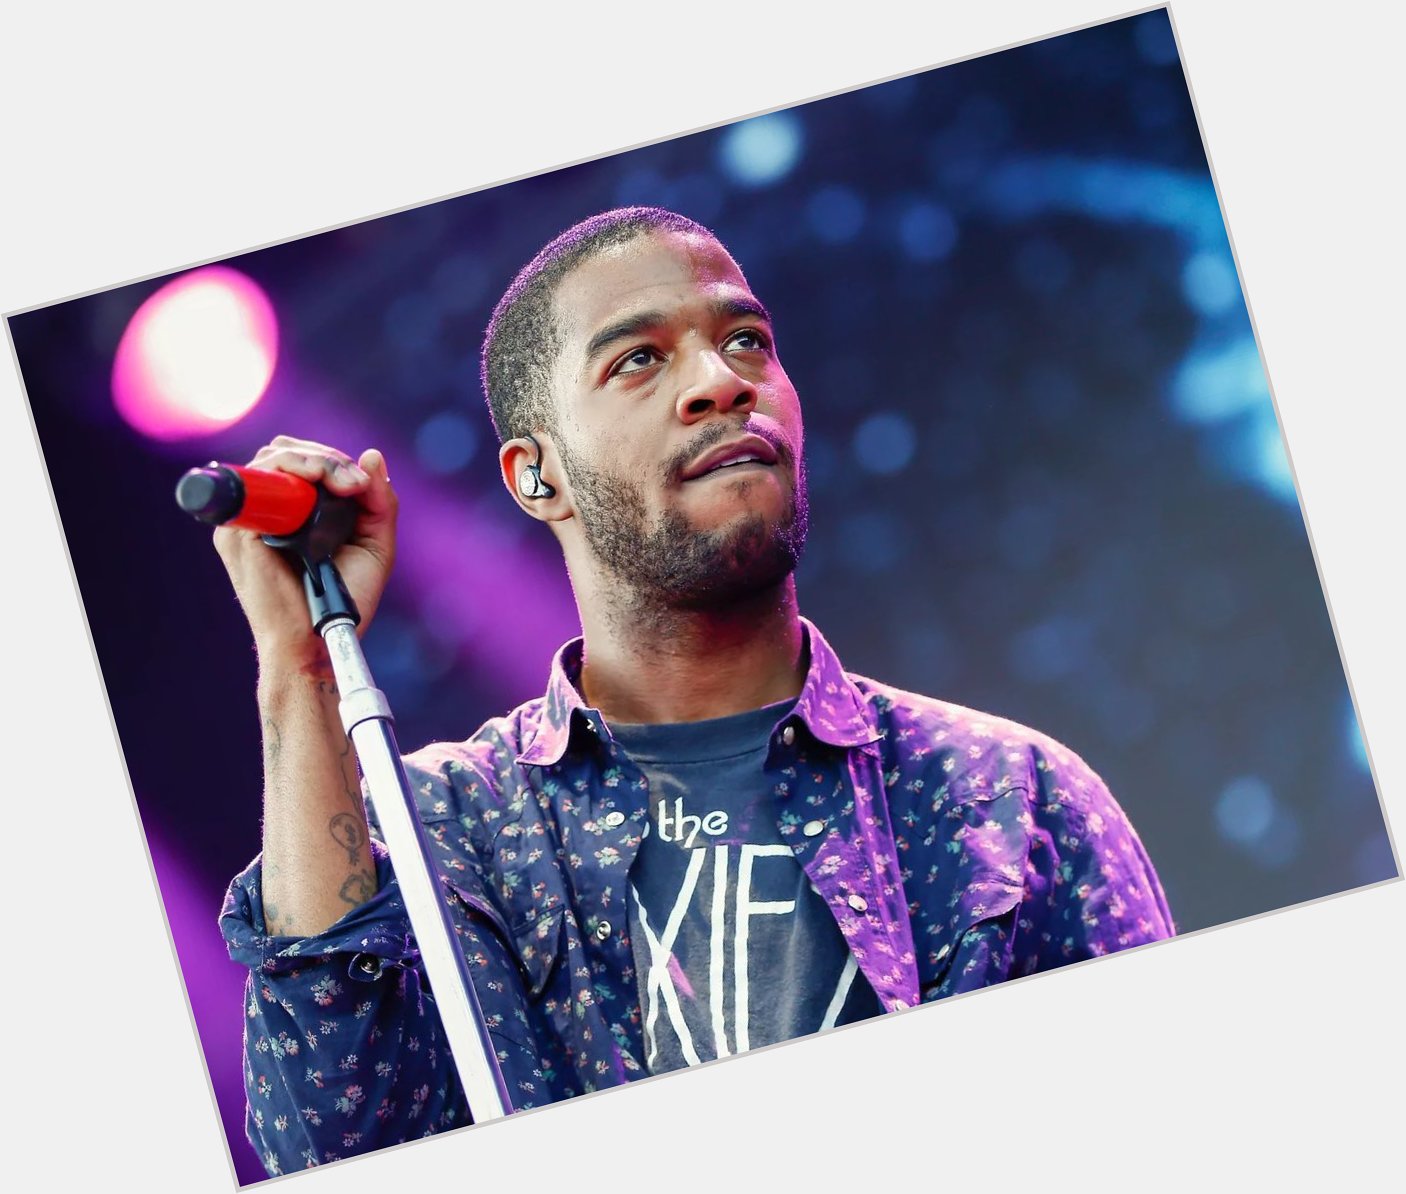 Happy birthday Kid Cudi Today he turns 37 years old 